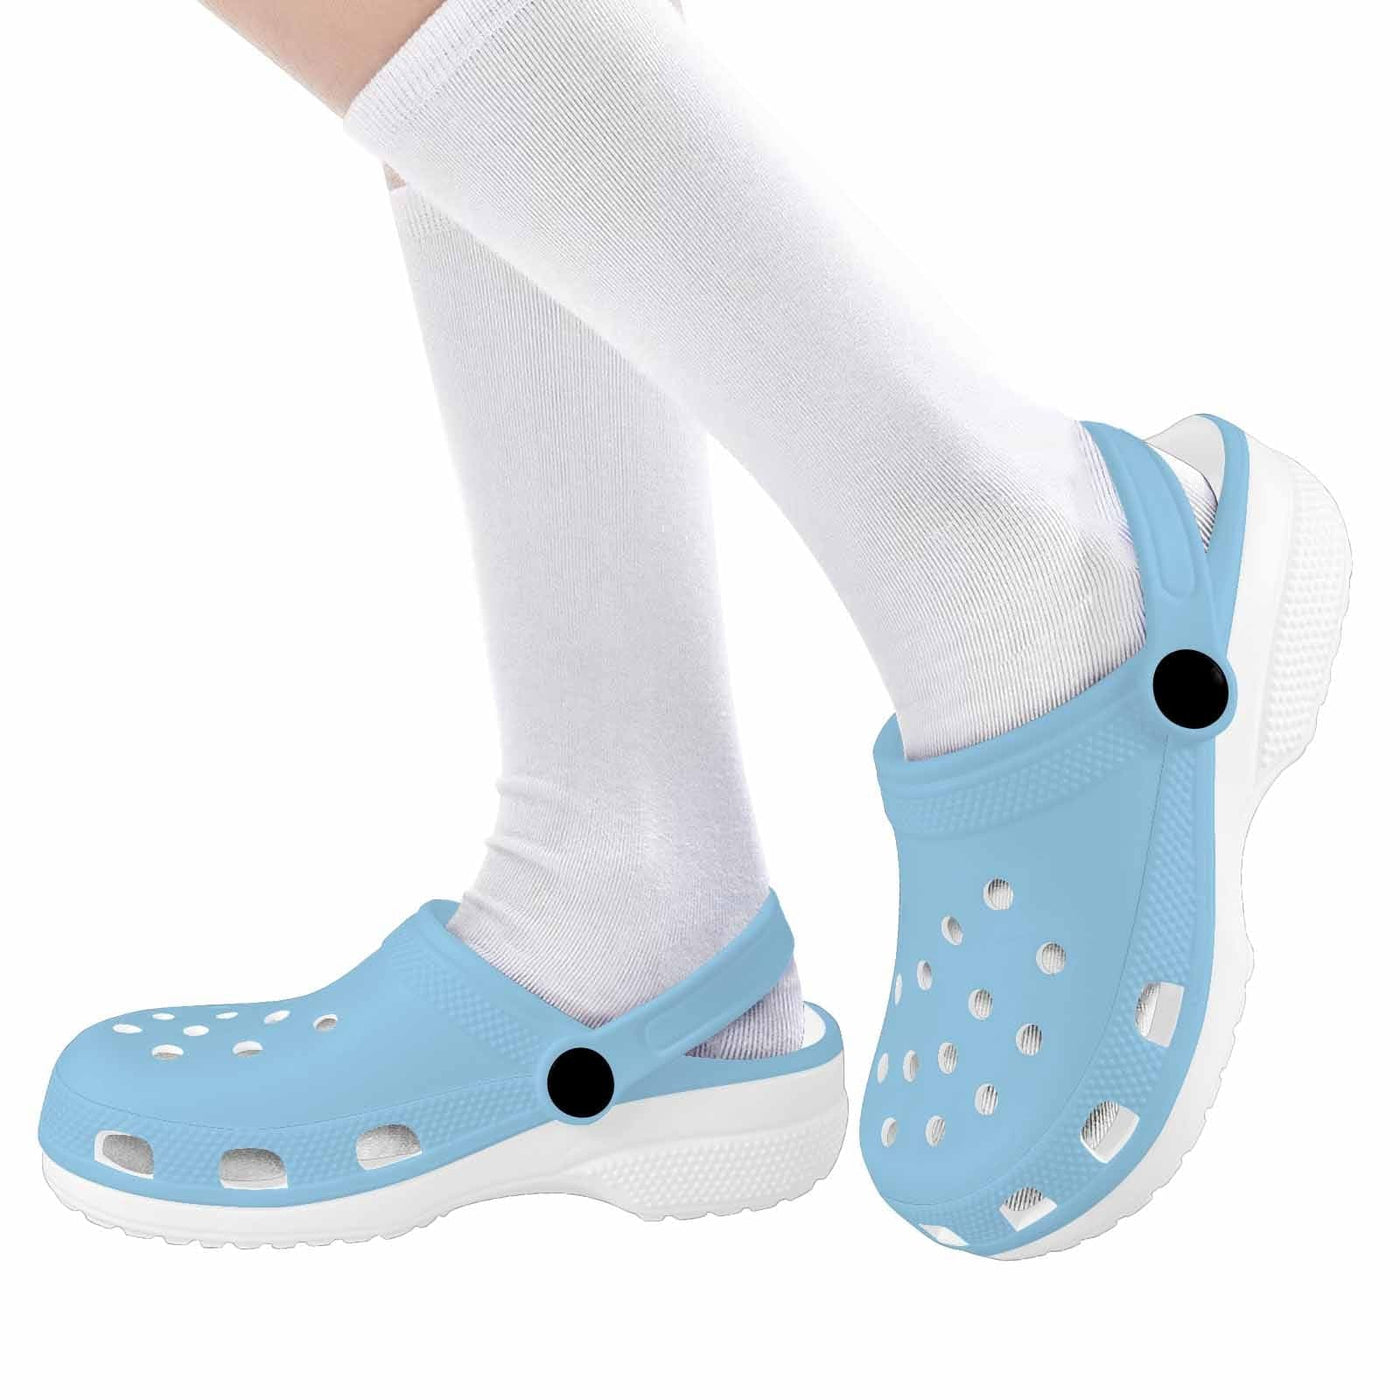 Cornflower Blue Clogs For Youth - Unisex | Clogs | Youth